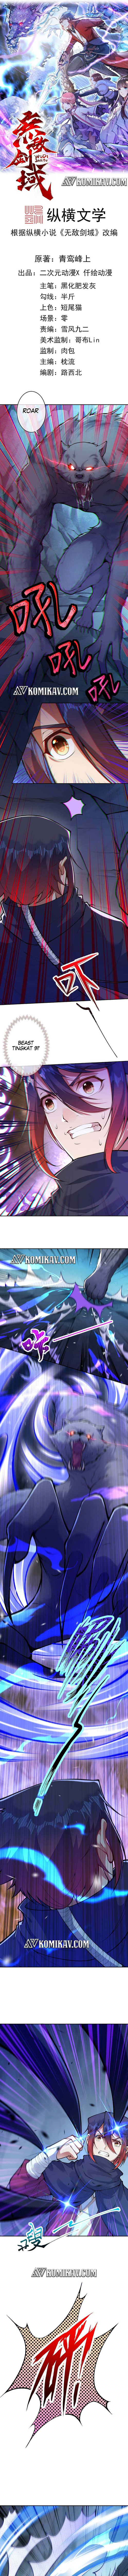 Invincible Sword Domain Chapter 32 2